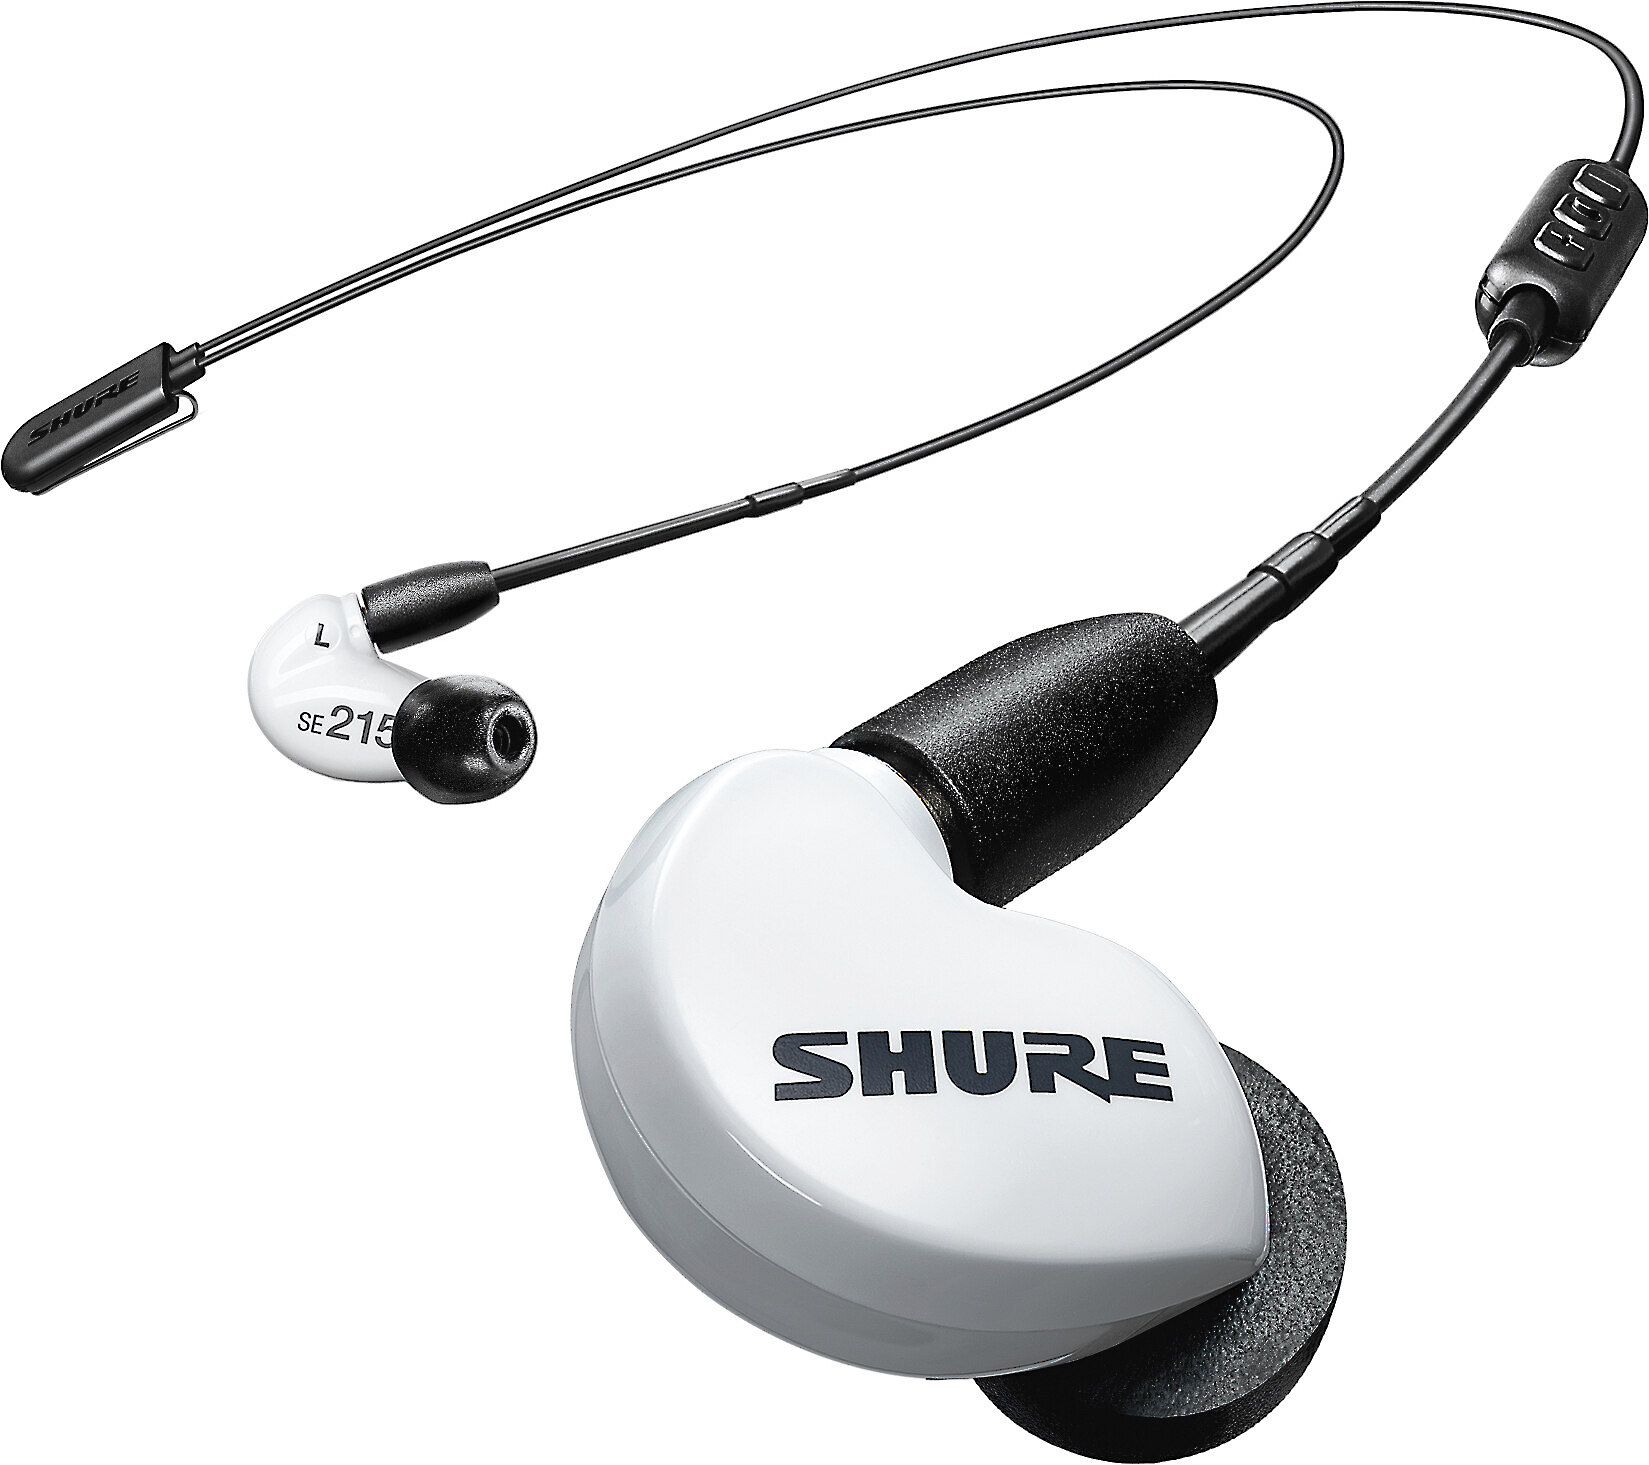 Shure SE215 Pro (Limited Edition Green) Sound Isolating™ wired earphones at  Crutchfield